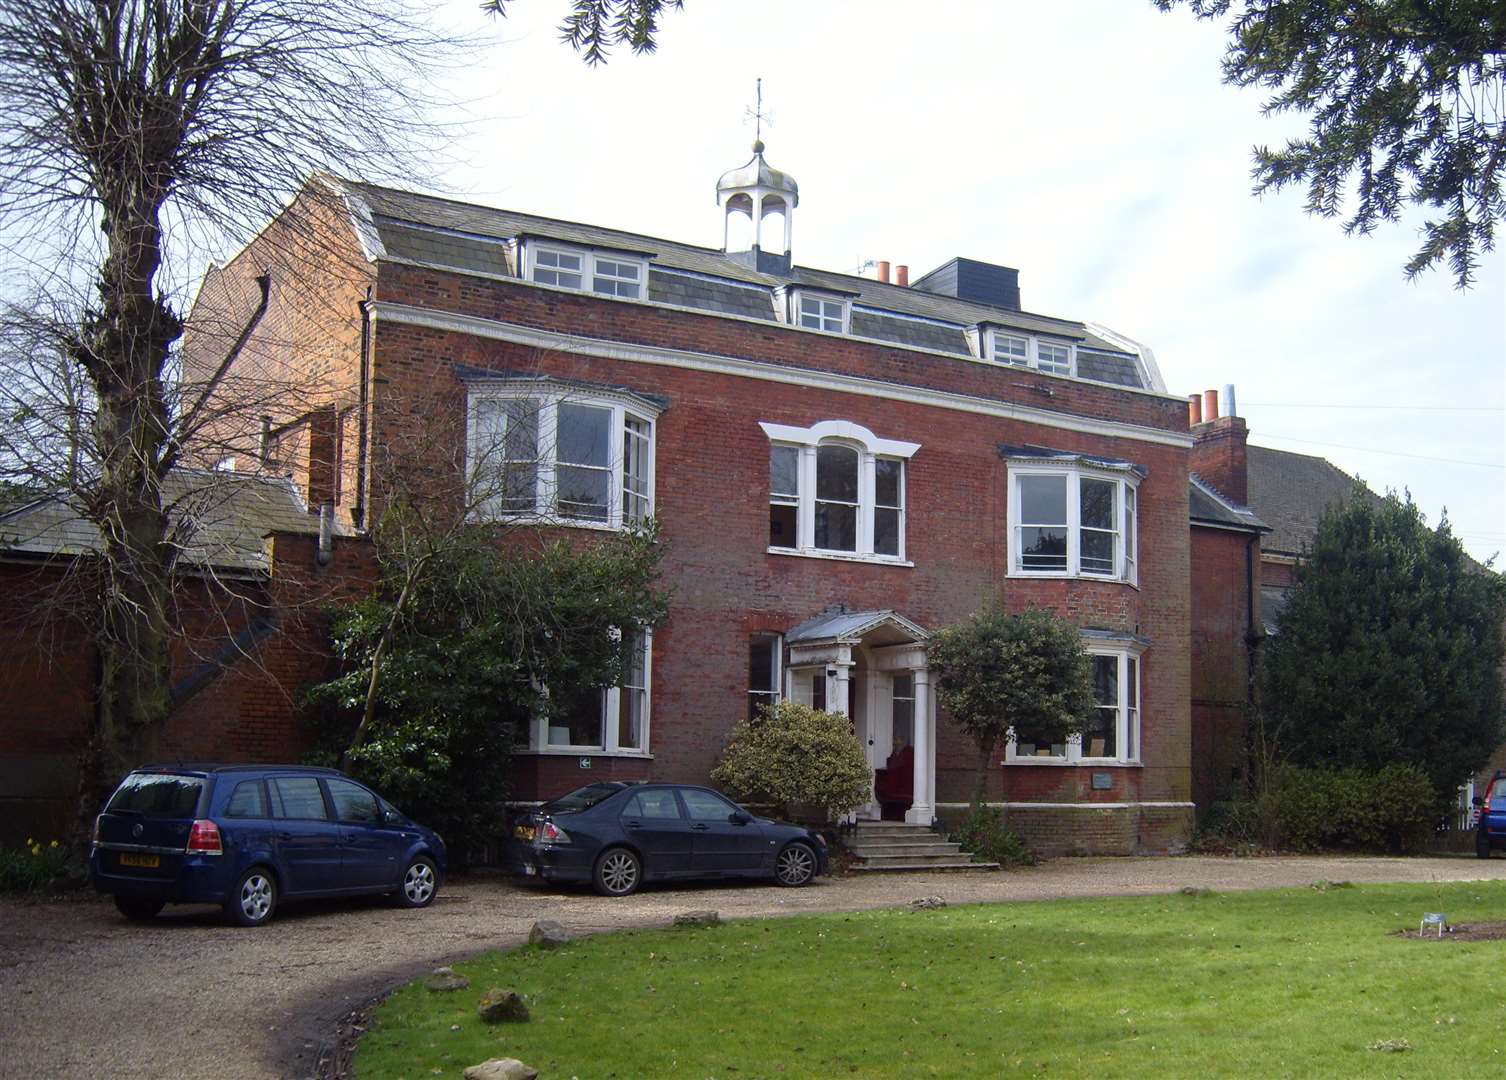 Dickens lived at Gads Hill Place